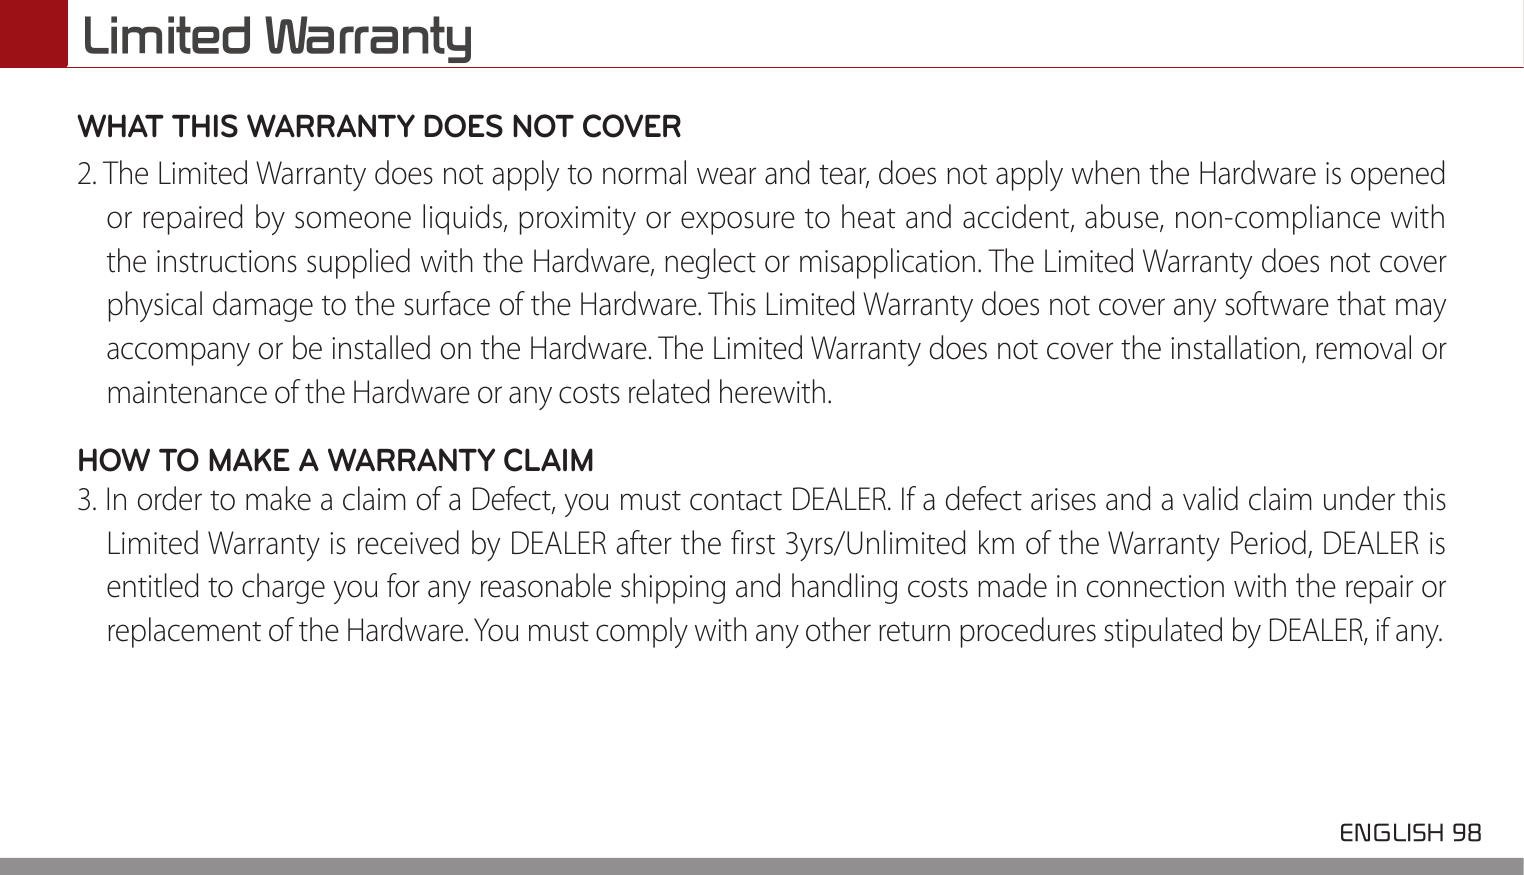 Limited Warranty ENGLISH 98 WHAT THIS WARRANTY DOES NOT COVER 2. The Limited Warranty does not apply to normal wear and tear, does not apply when the Hardware is openedor repaired by someone liquids, proximity or exposure to heat and accident, abuse, non-compliance withthe instructions supplied with the Hardware, neglect or misapplication. The Limited Warranty does not coverphysical damage to the surface of the Hardware. This Limited Warranty does not cover any software that mayaccompany or be installed on the Hardware. The Limited Warranty does not cover the installation, removal ormaintenance of the Hardware or any costs related herewith.HOW TO MAKE A WARRANTY CLAIM 3. In order to make a claim of a Defect, you must contact DEALER. If a defect arises and a valid claim under thisLimited Warranty is received by DEALER after the first 3yrs/Unlimited km of the Warranty Period, DEALER isentitled to charge you for any reasonable shipping and handling costs made in connection with the repair orreplacement of the Hardware. You must comply with any other return procedures stipulated by DEALER, if any.